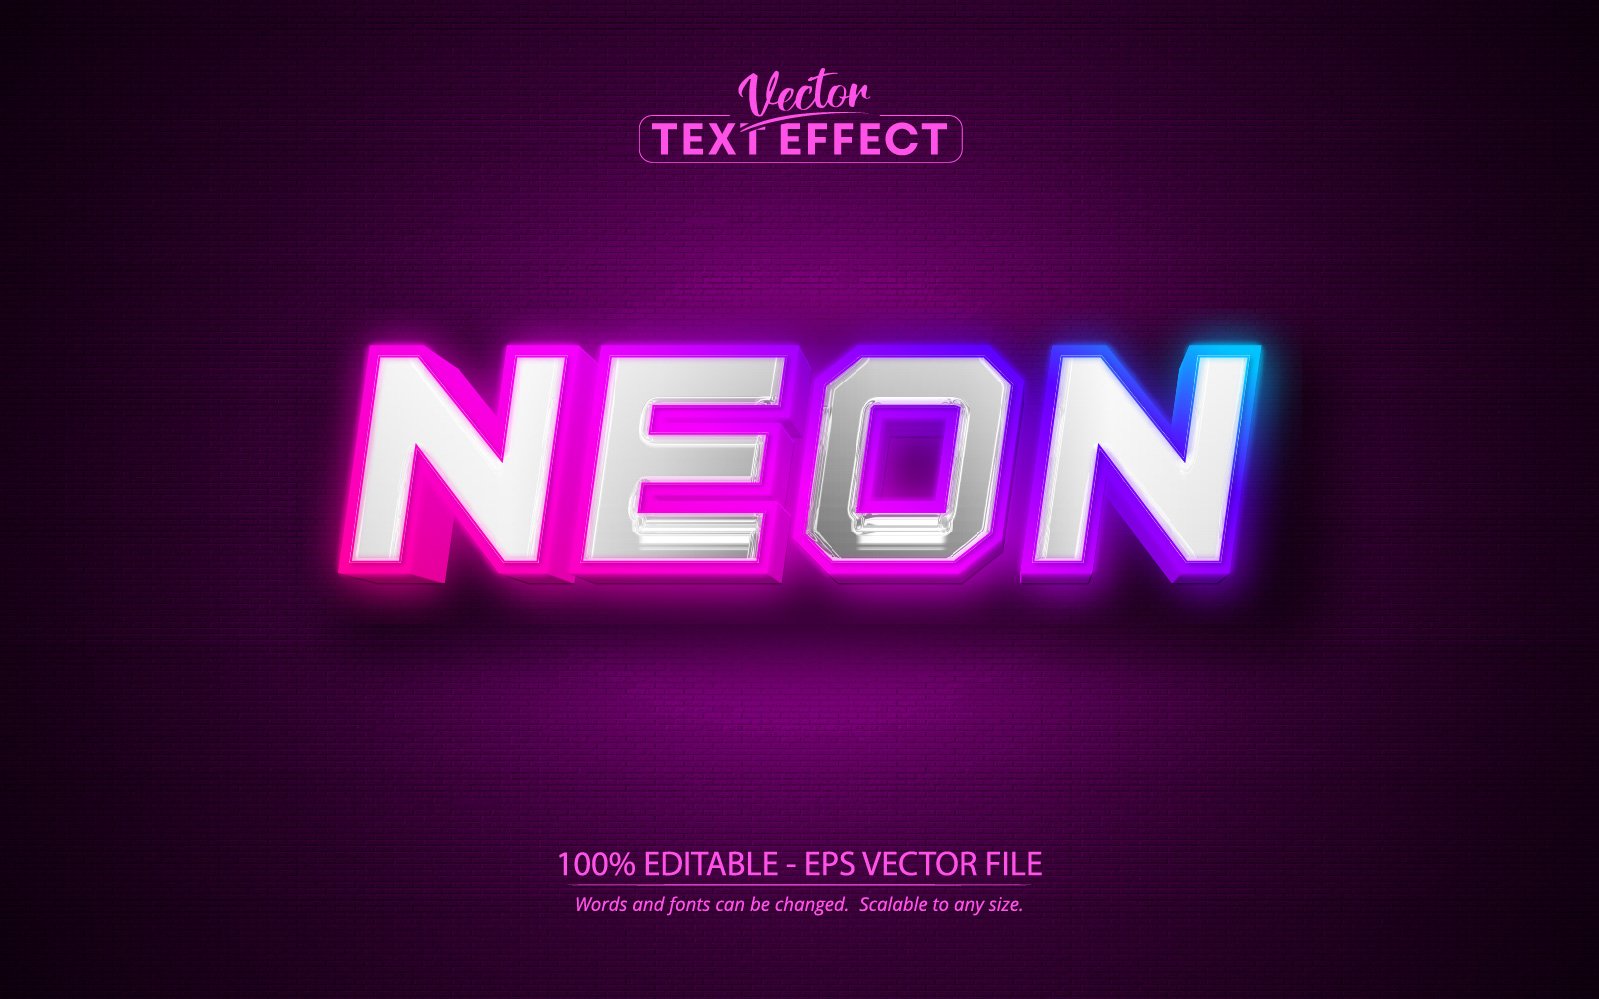 Neon - Editable Text Effect, Colorful Neon Lights Text Style, Graphics Illustration